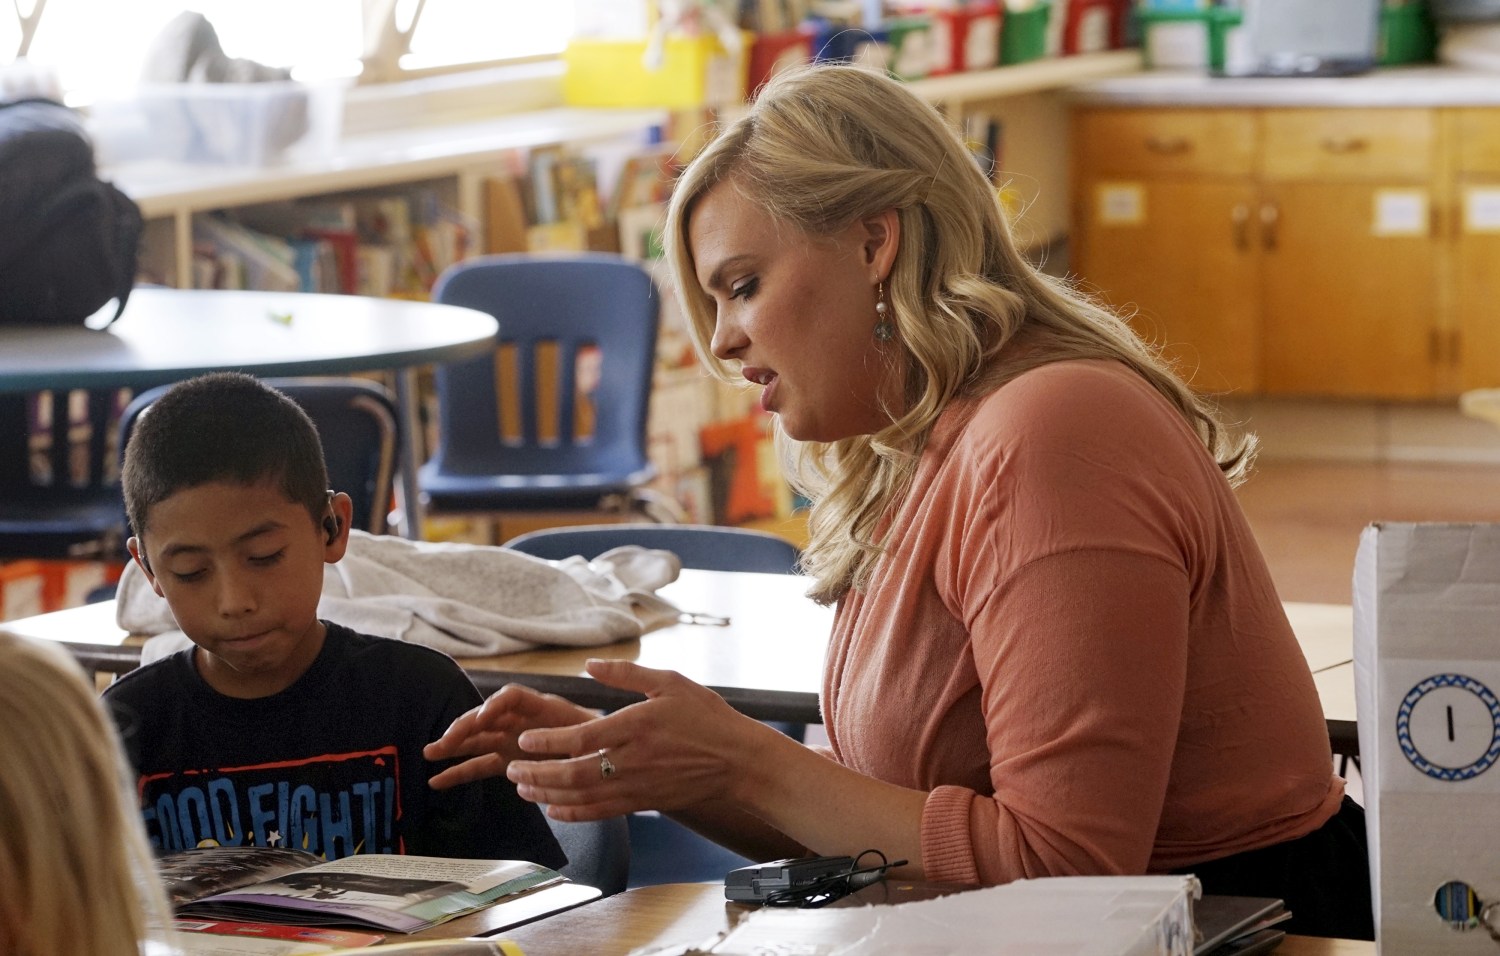 Kyle Schwartz, 3rd grade teacher, works with a student at Doull Elementary School in Denver